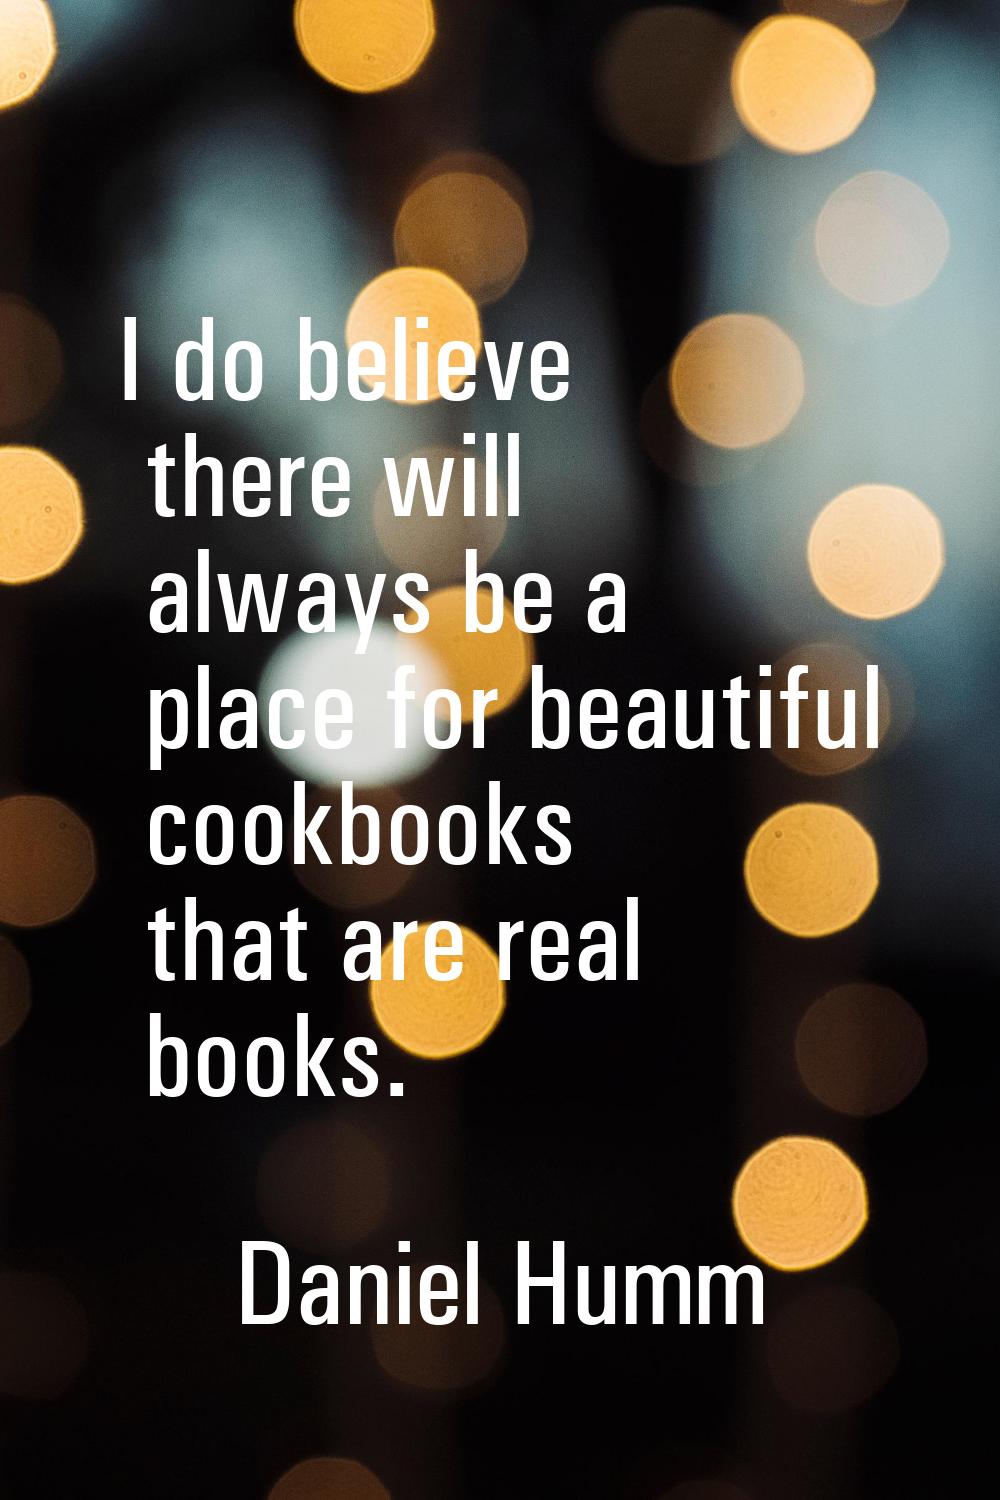 I do believe there will always be a place for beautiful cookbooks that are real books.